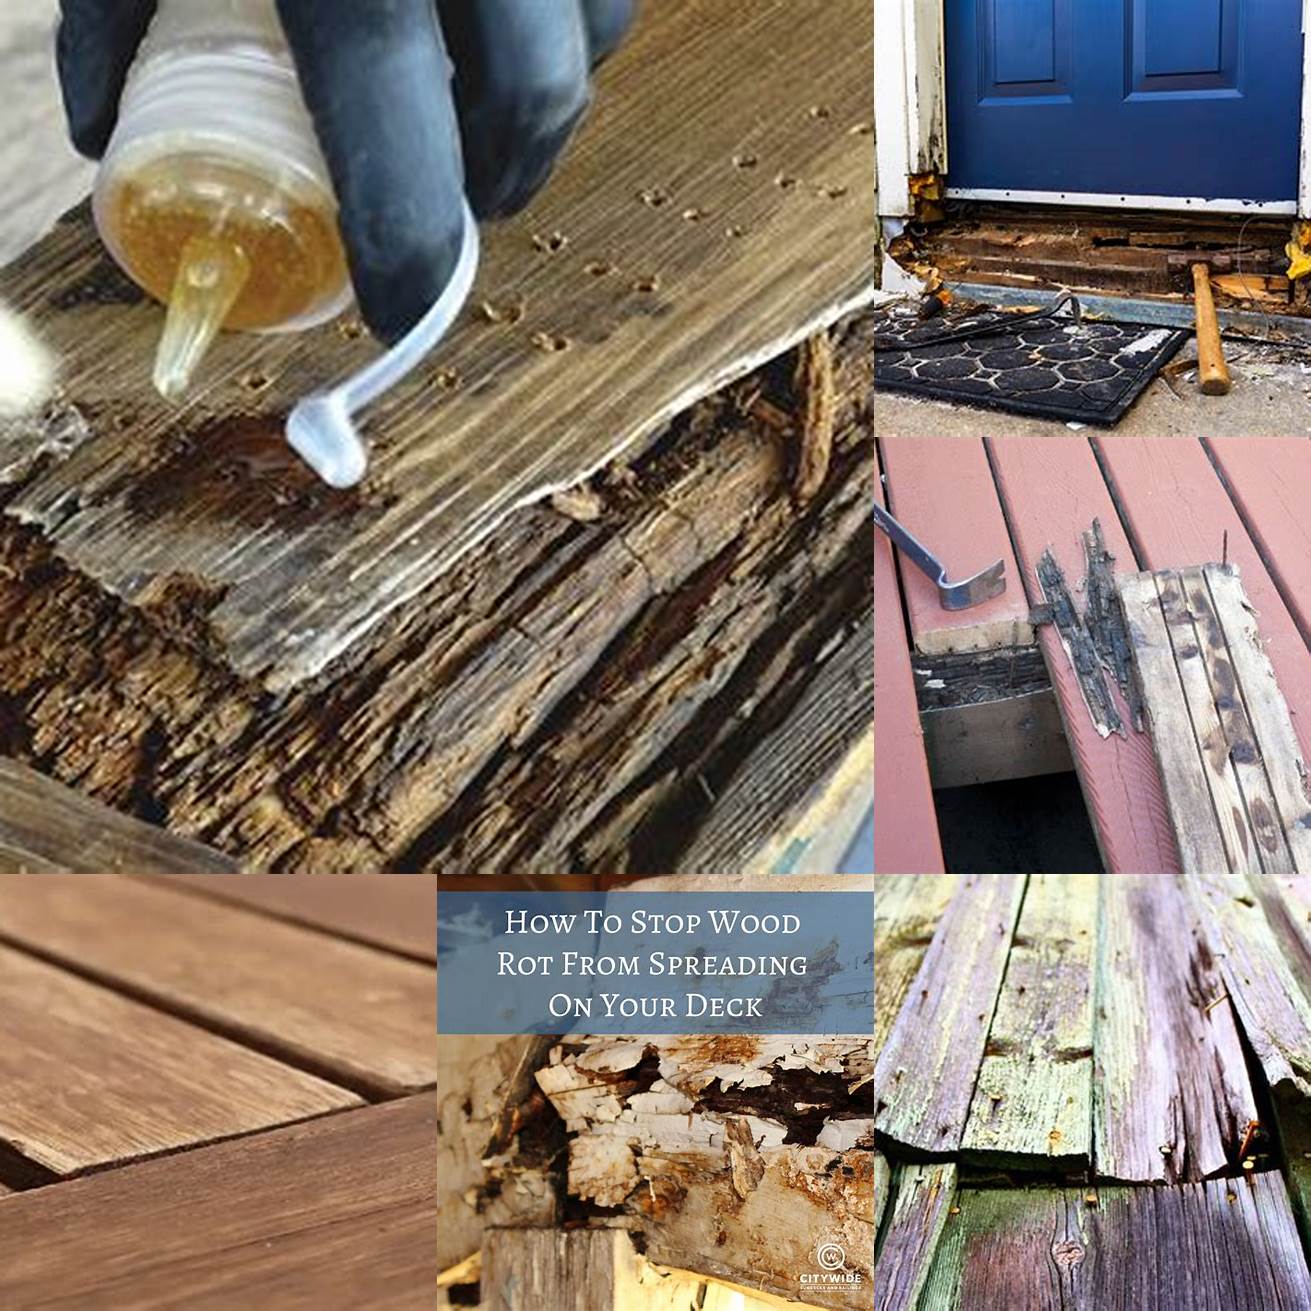 Protect it from water Wood can warp or rot if its exposed to too much water so be sure to wipe up any spills or splashes as soon as possible You can also apply a sealant or varnish to help protect the wood